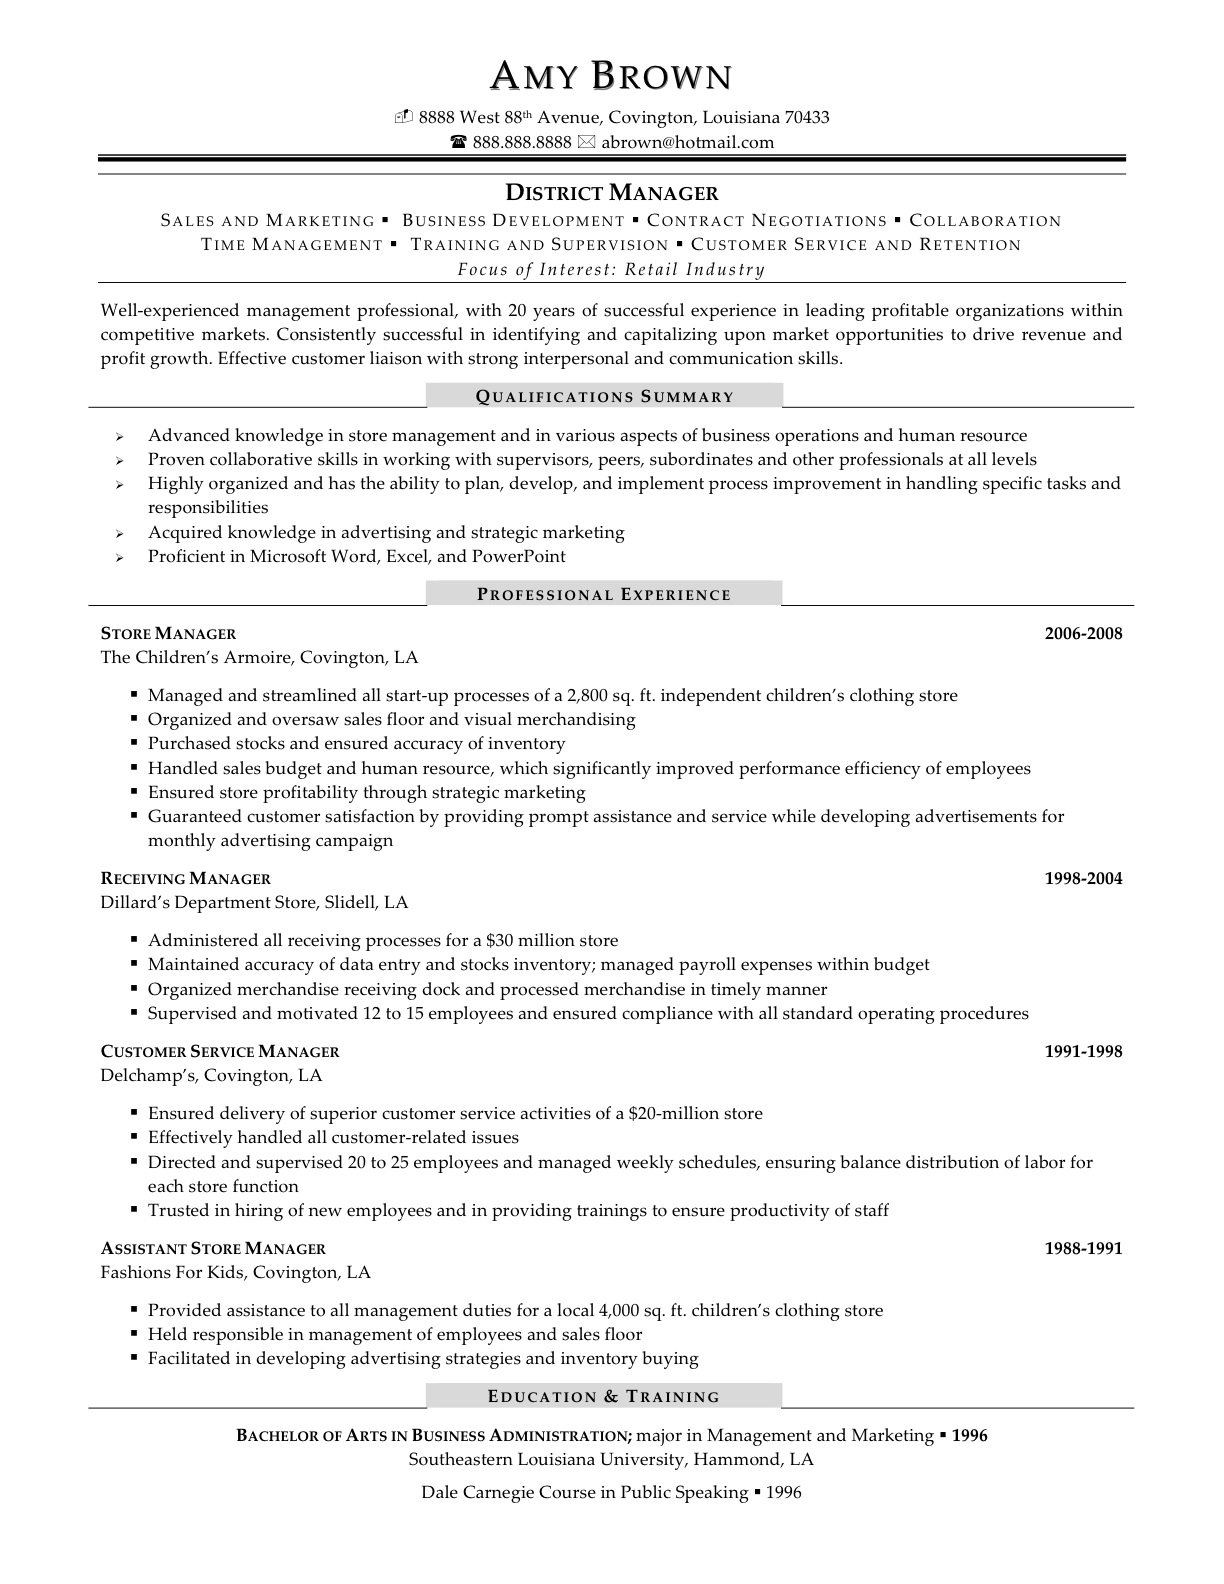 Store manager resume for luxury brand